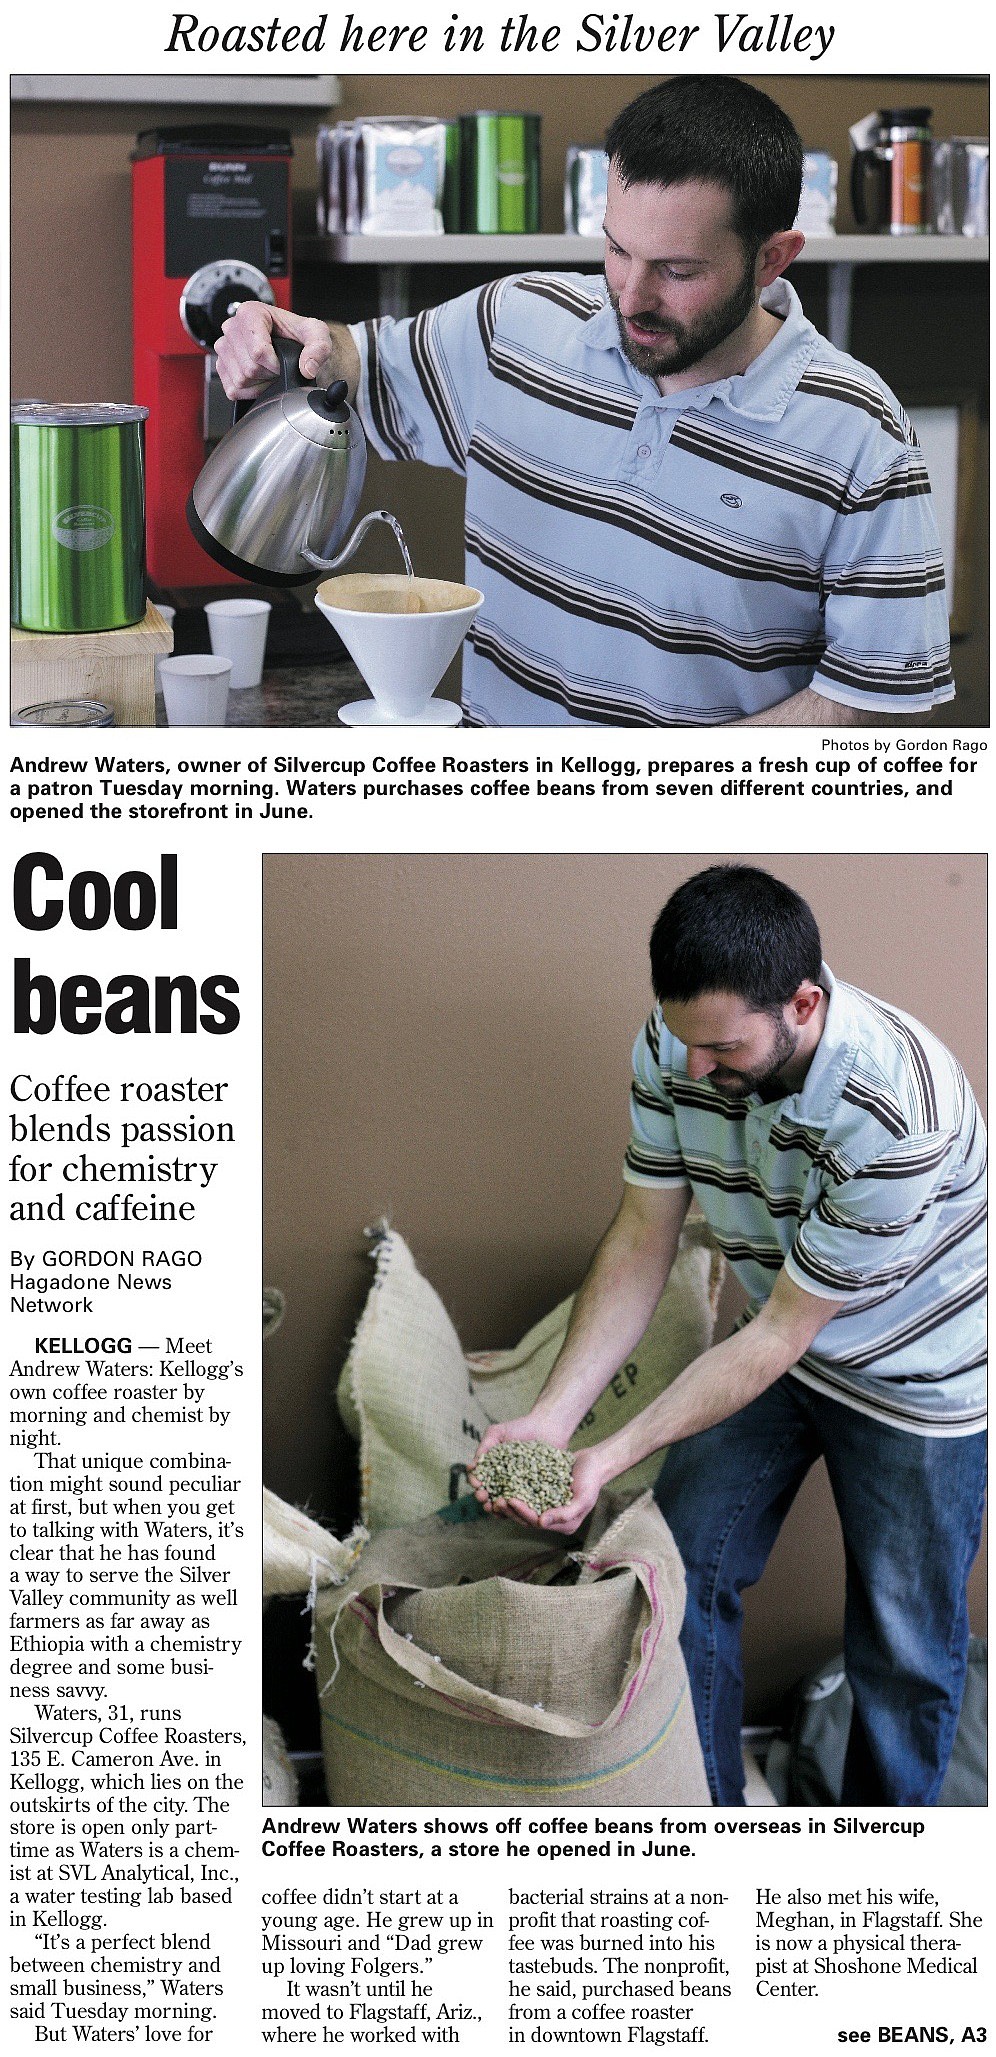 SilverCup Roasters front-page story in the March 26, 2014, edition of the Shoshone News-Press, announcing their grand opening.